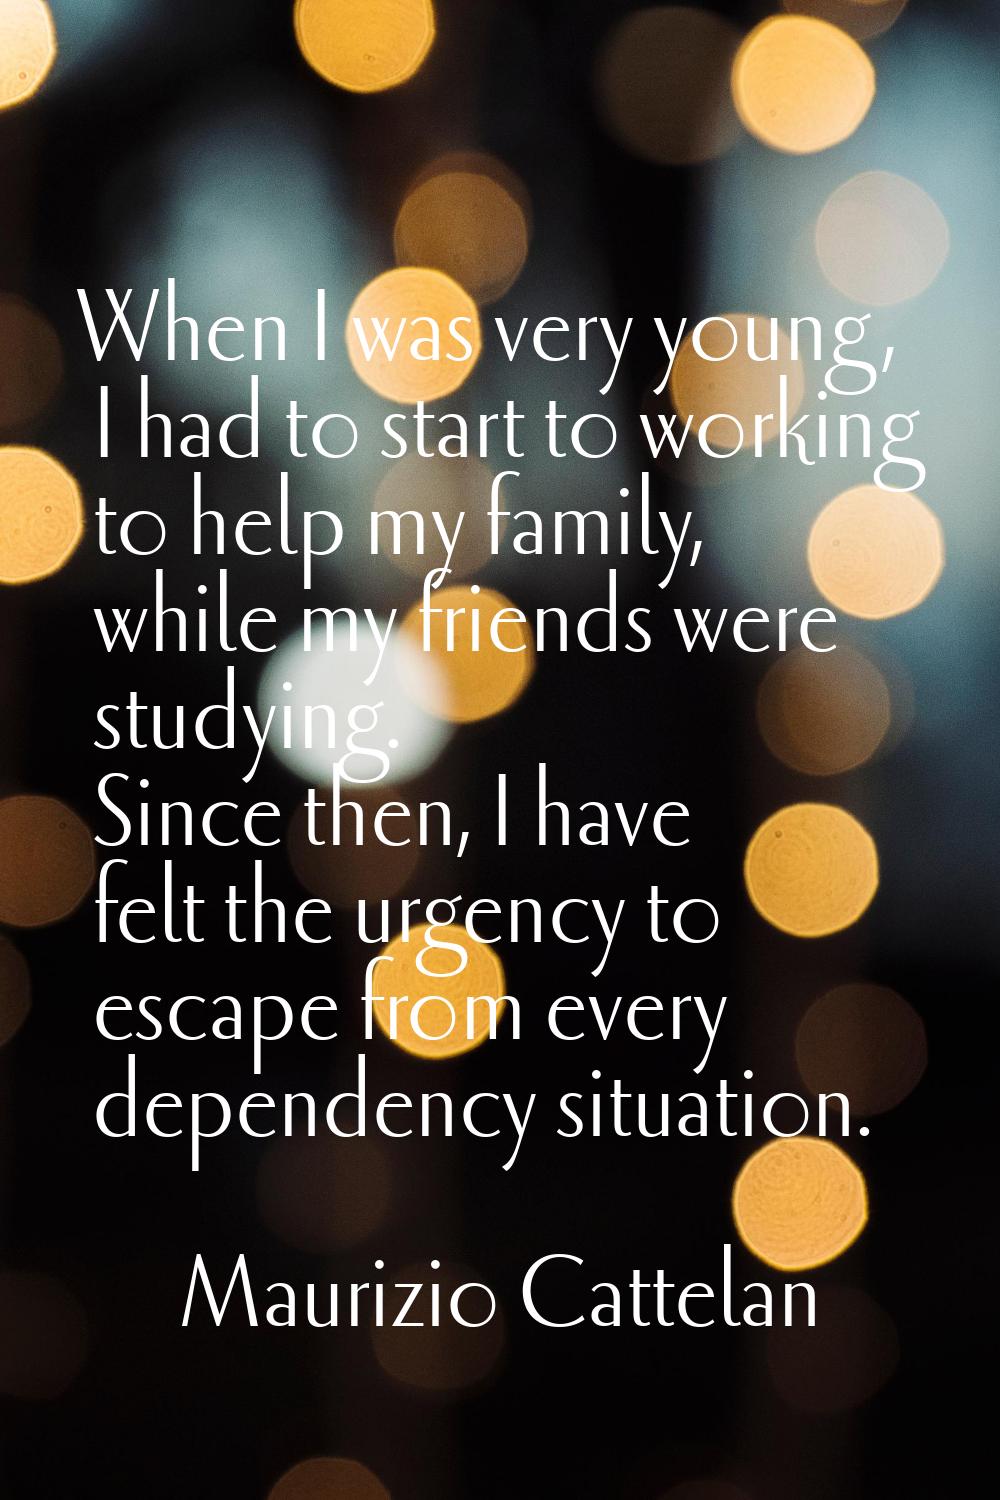 When I was very young, I had to start to working to help my family, while my friends were studying.